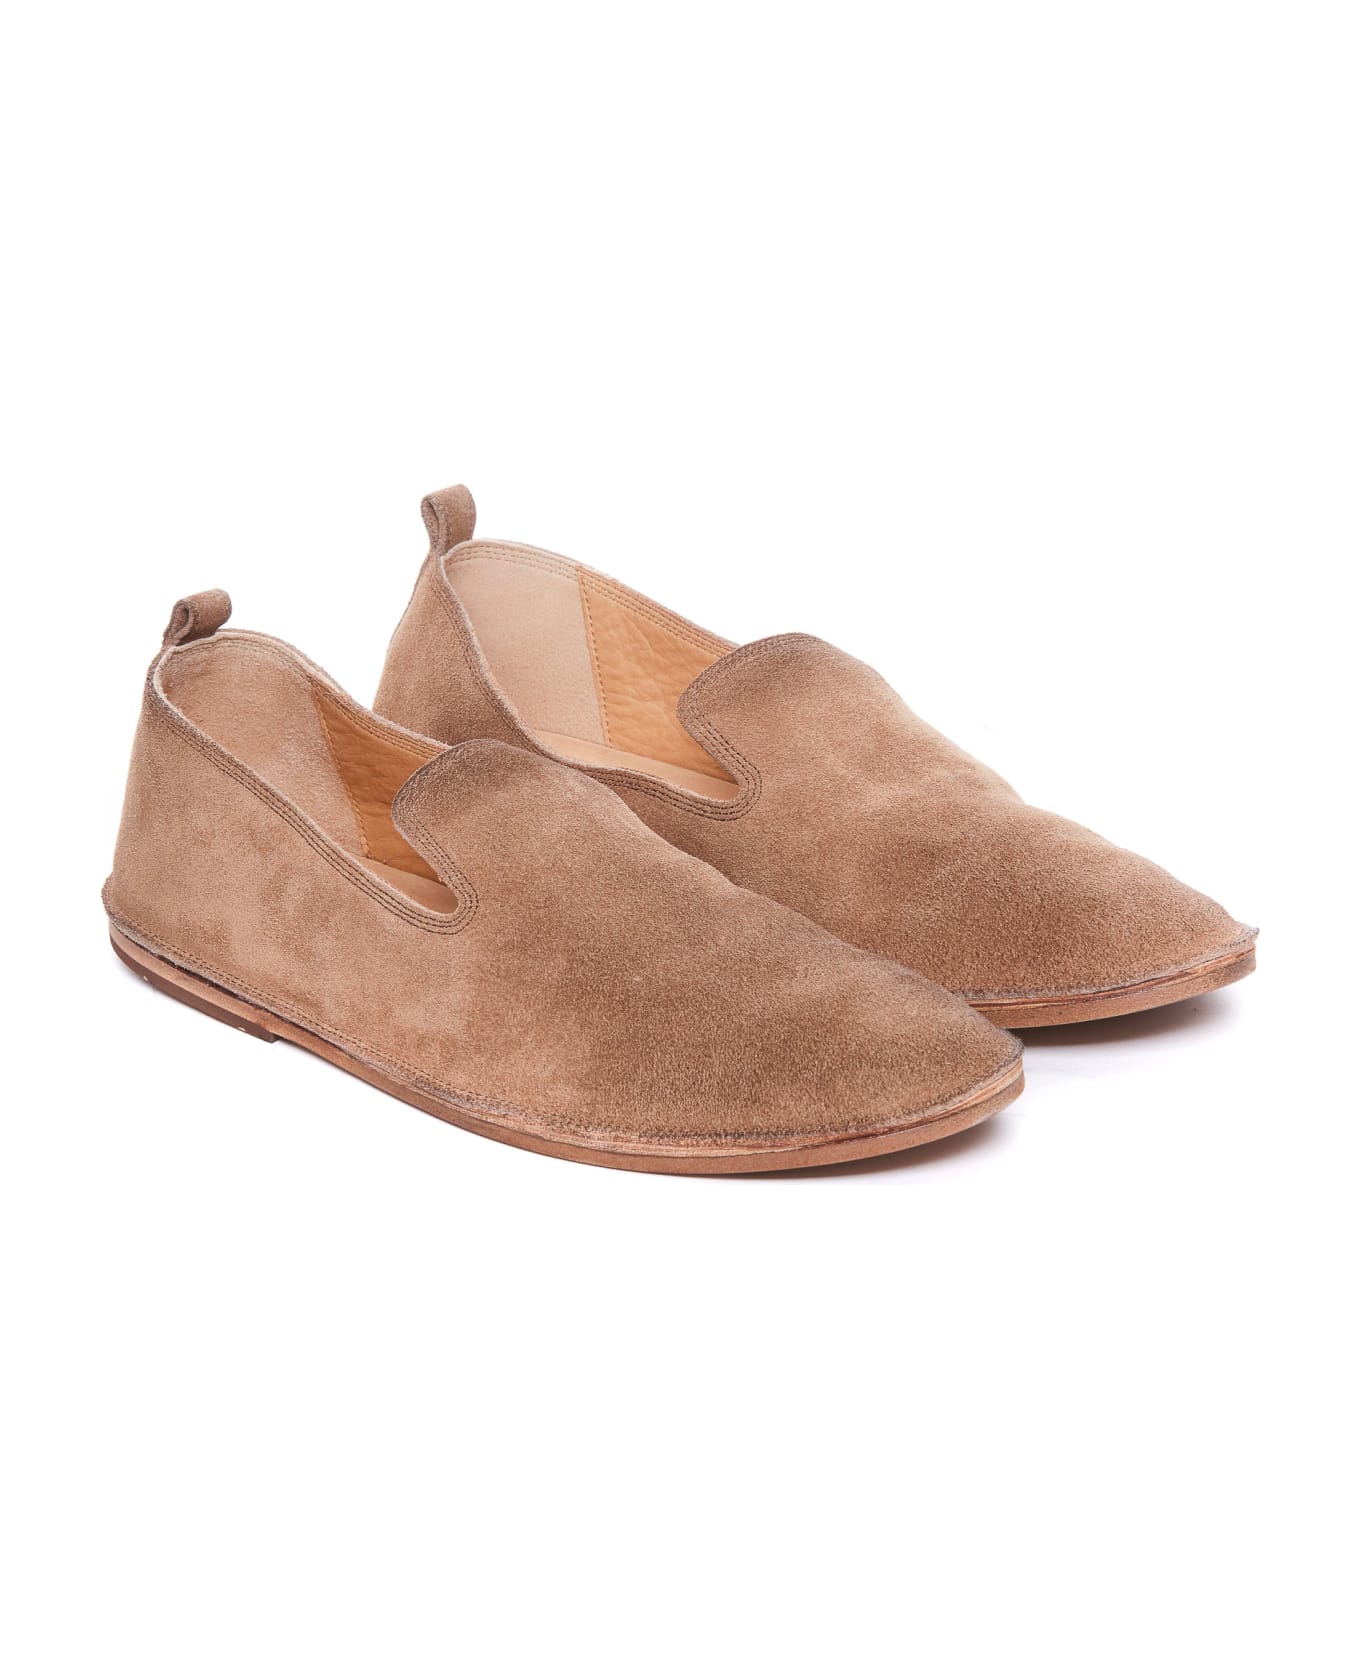 Marsell Strasacco Slippers - Beige